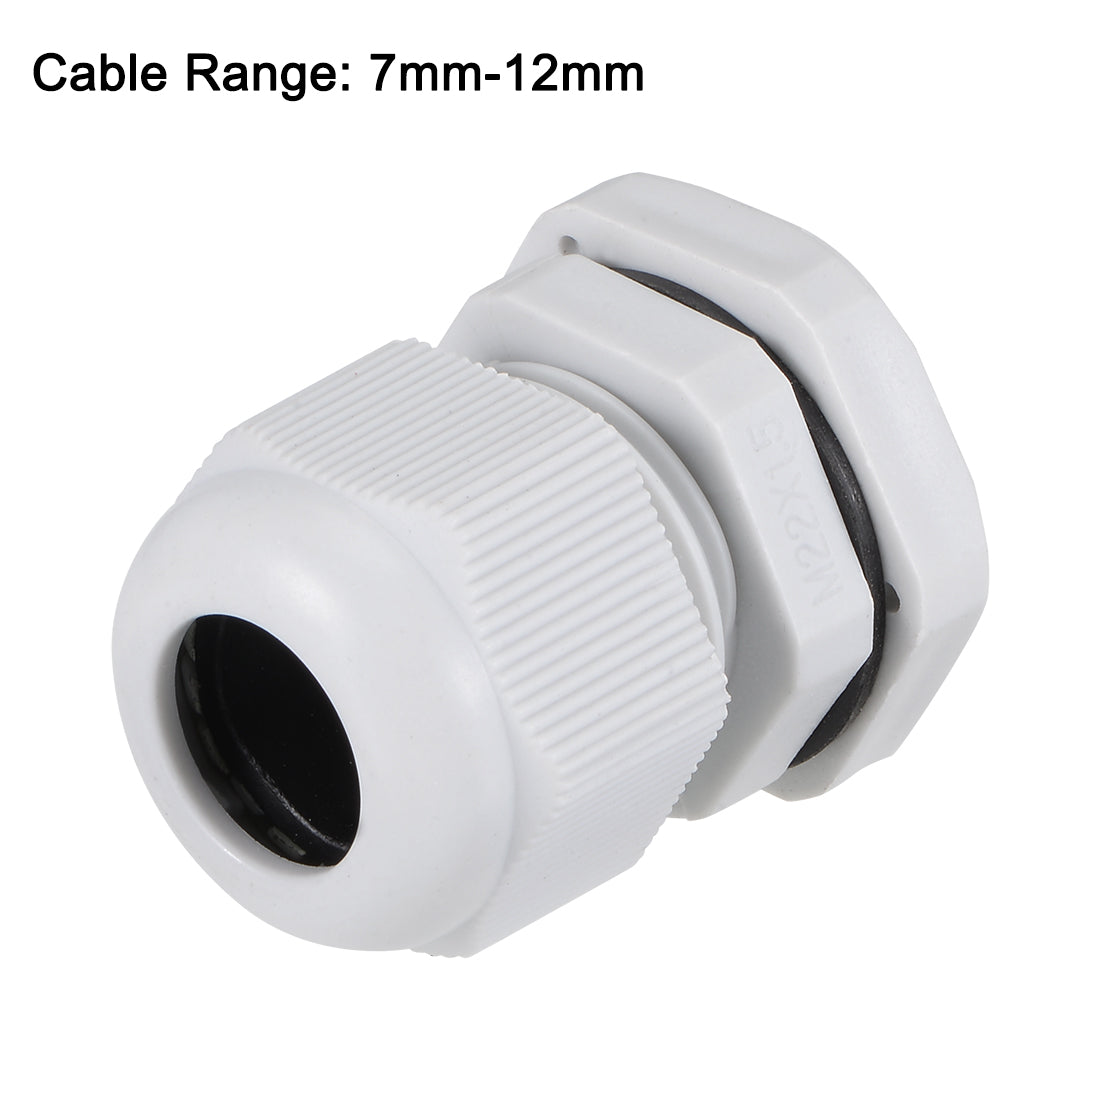 uxcell Uxcell M22x1.5 Cable Gland 7mm-12mm Wire Hole Waterproof Nylon Joint Adjustable Locknut with Washer White 20pcs